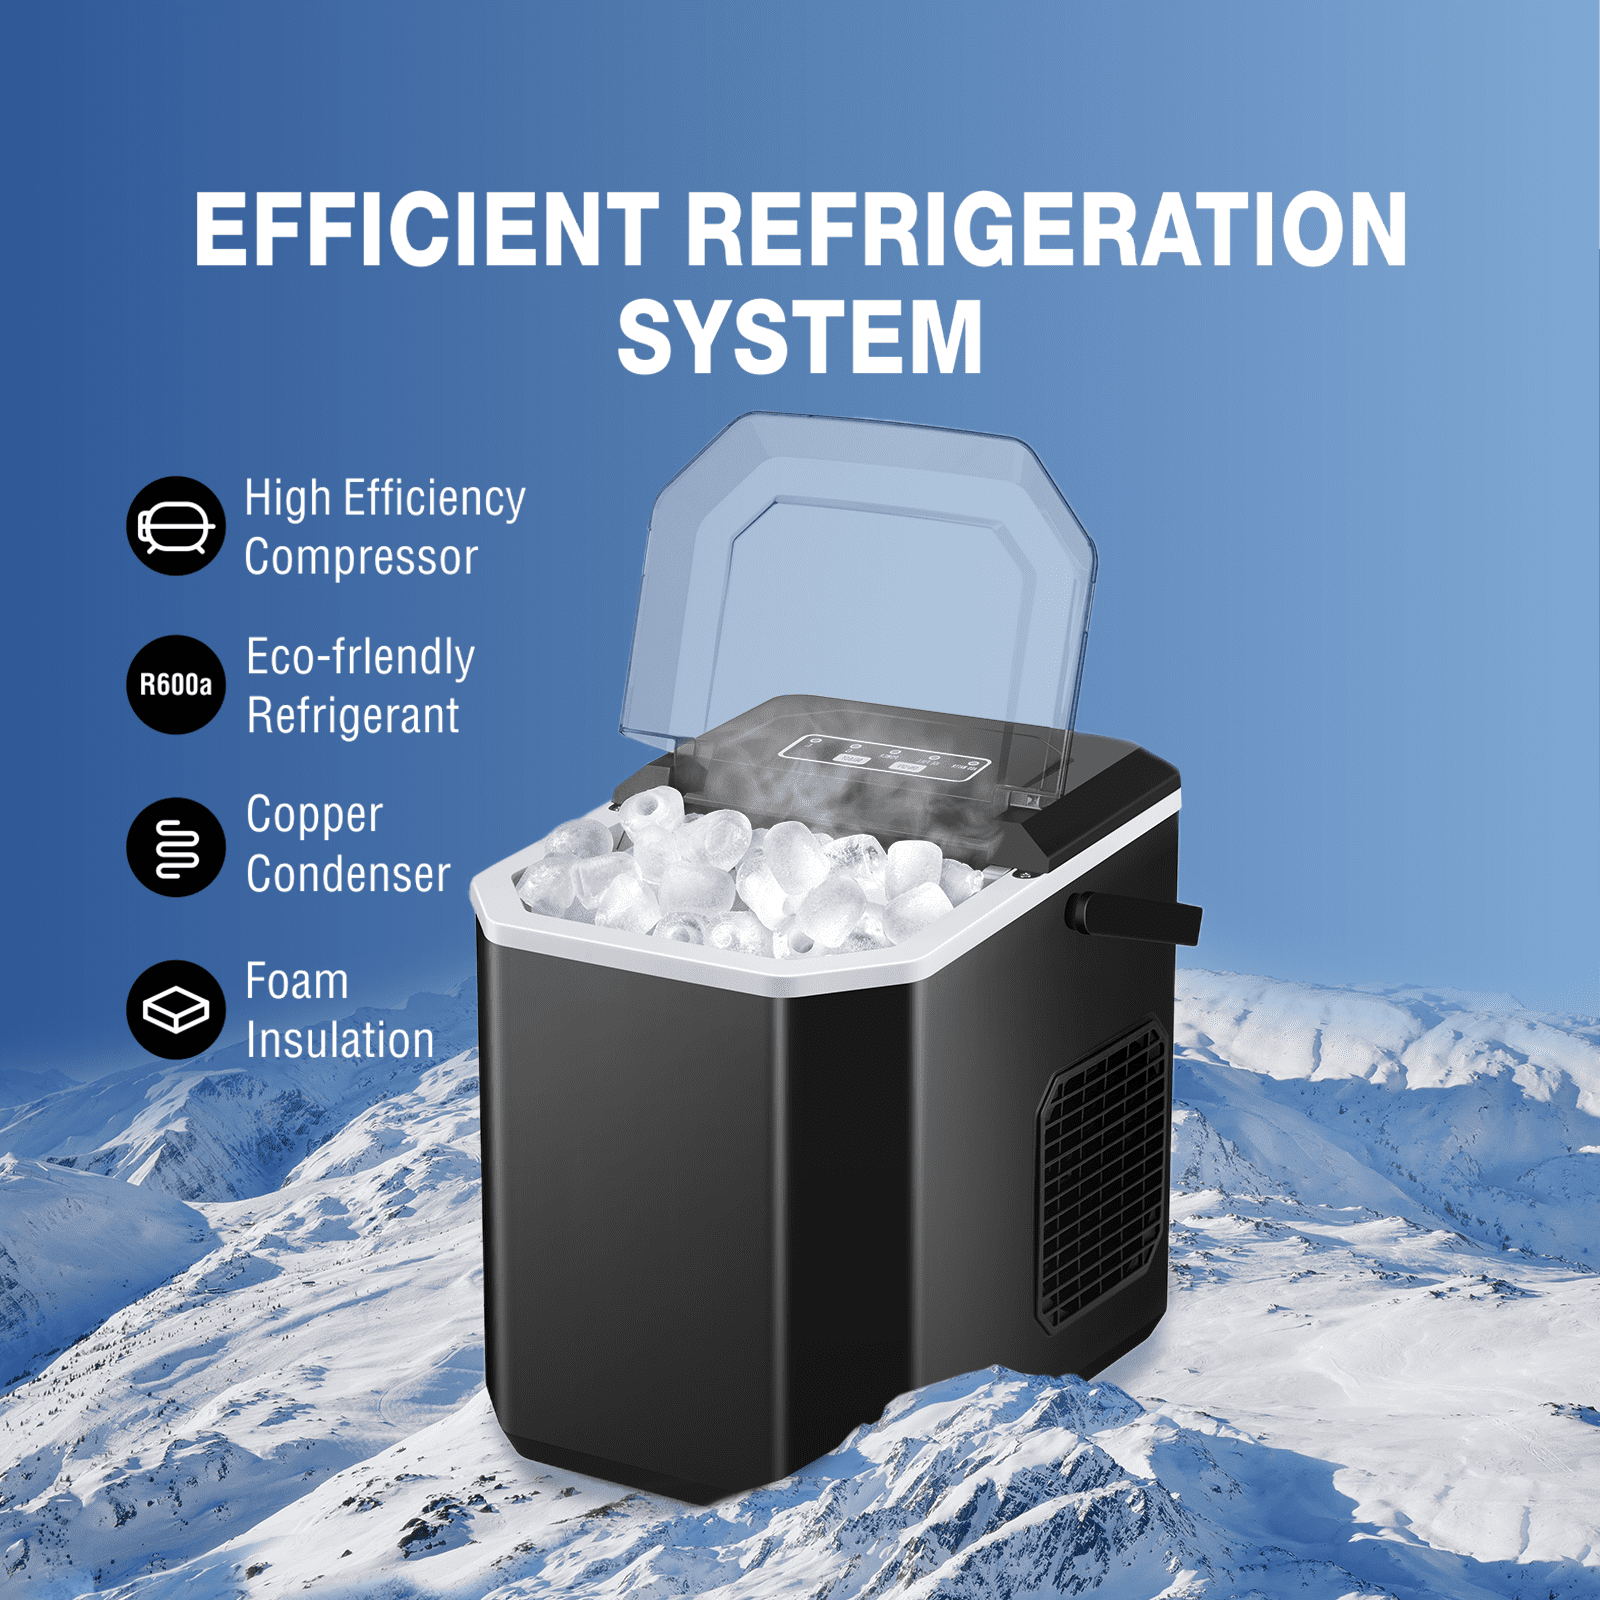 WATOOR Ice Maker Machine Countertop, 44Lbs/24H Auto Self-Cleaning, 24 Pcs Ice Cube in 15 Mins, 3L Portable Compact Ice Cube Maker with Ice Scoop, Perf